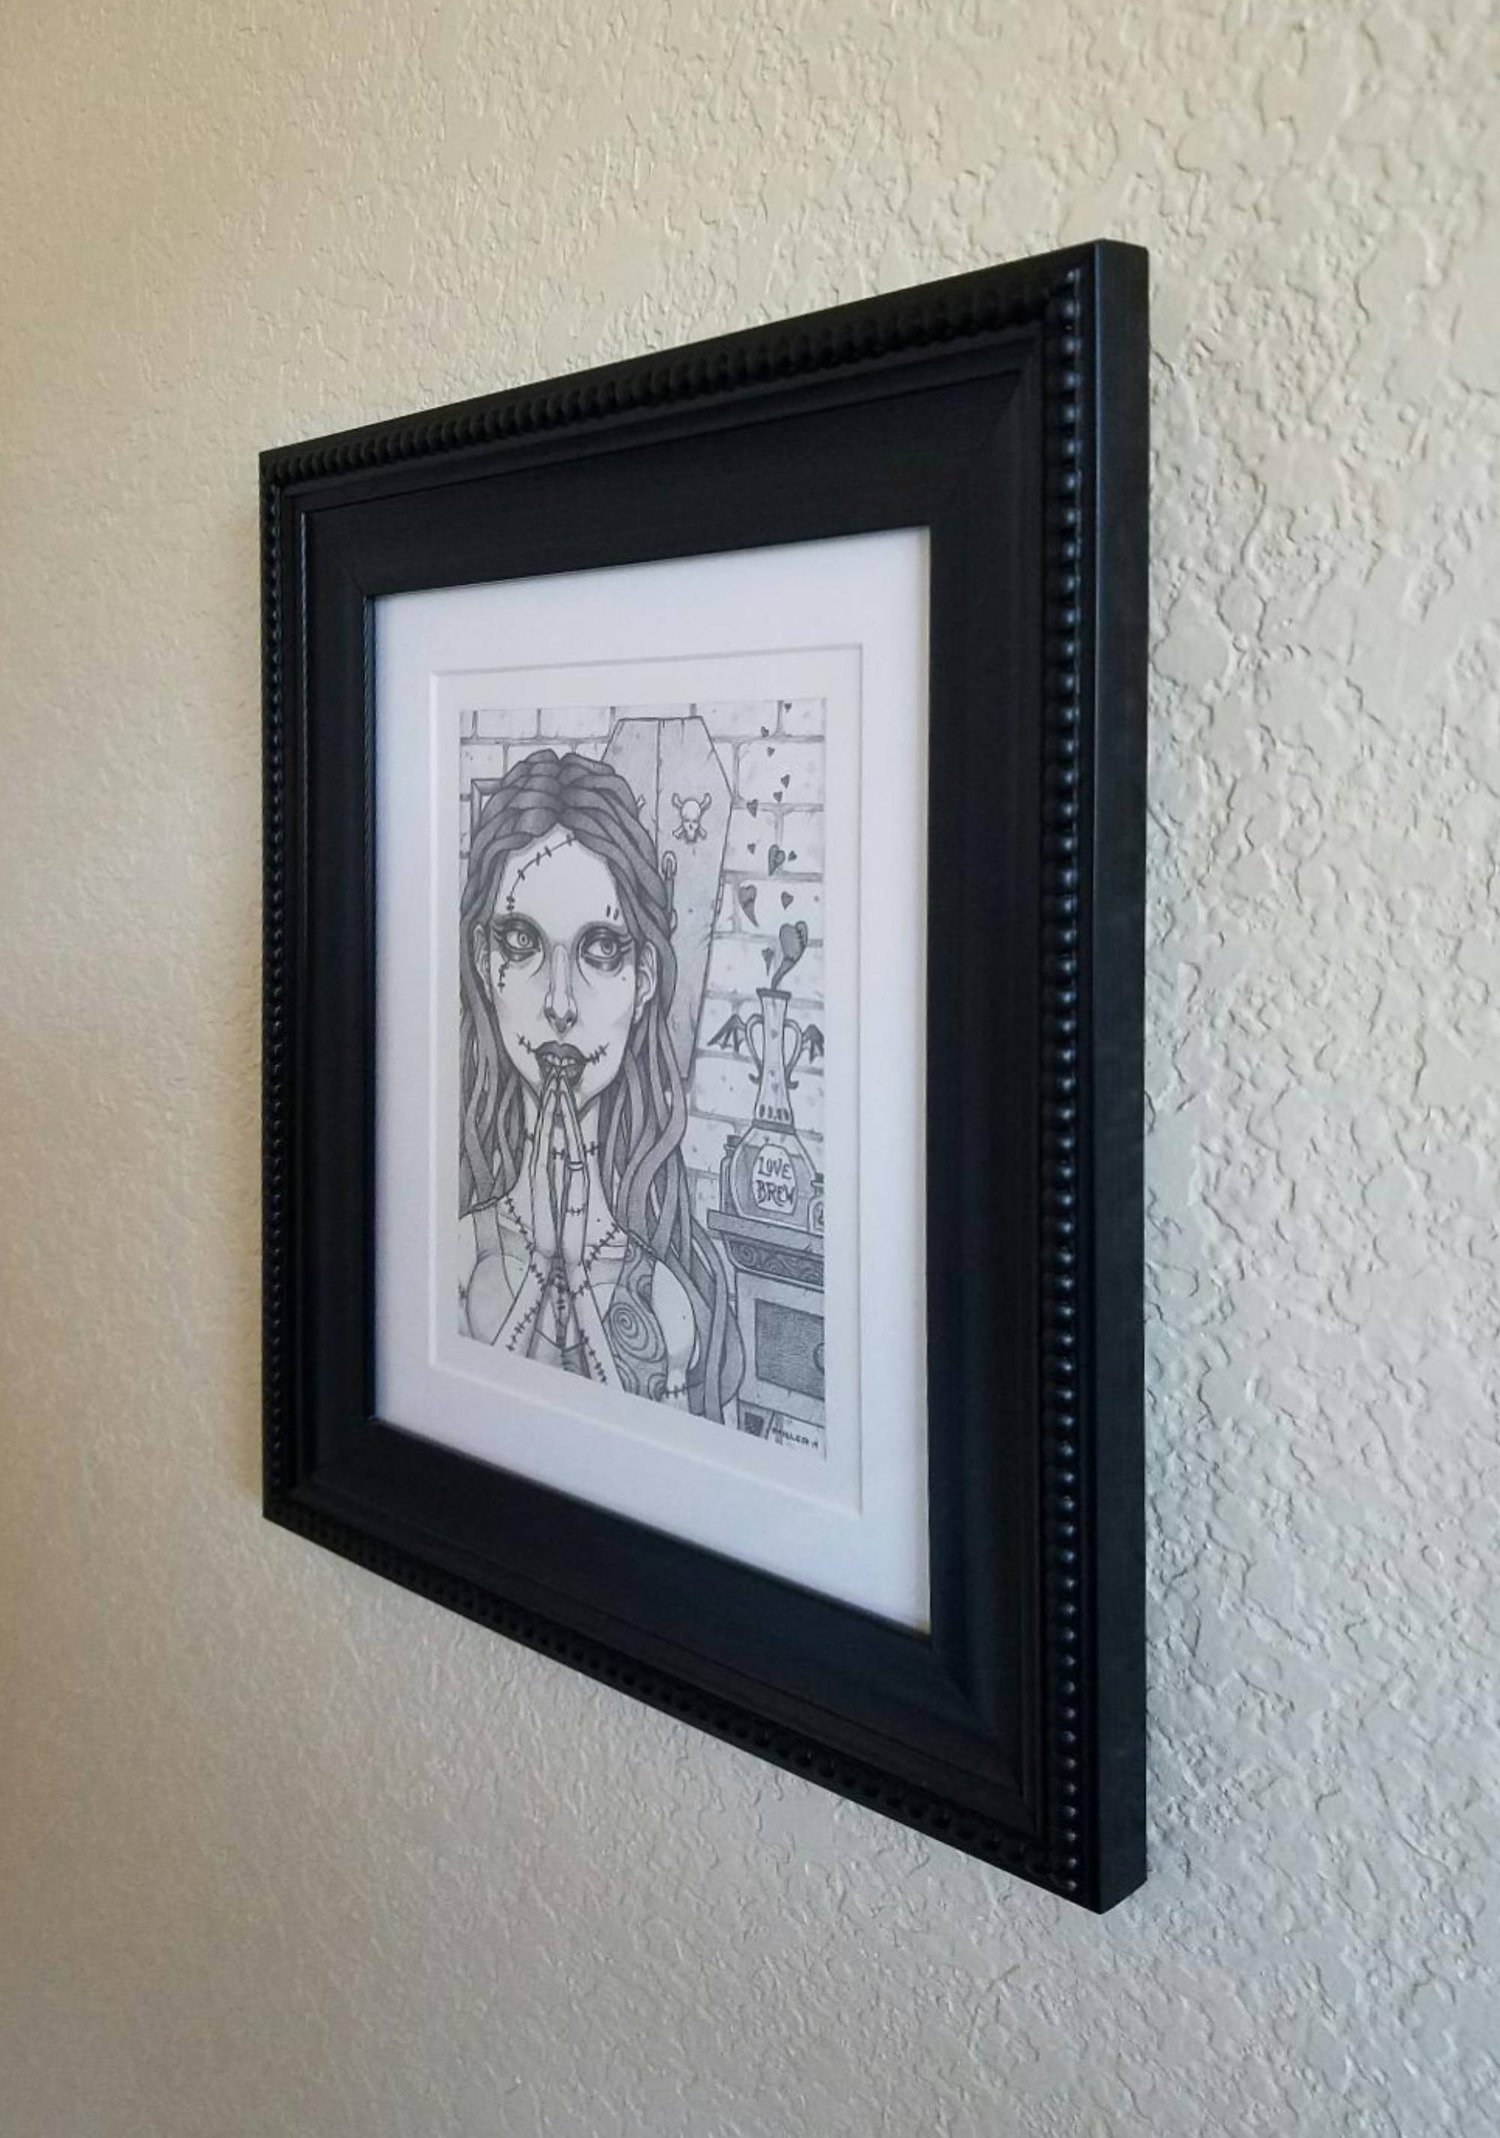 Image of Love You to Stitches! - Framed Original Graphite